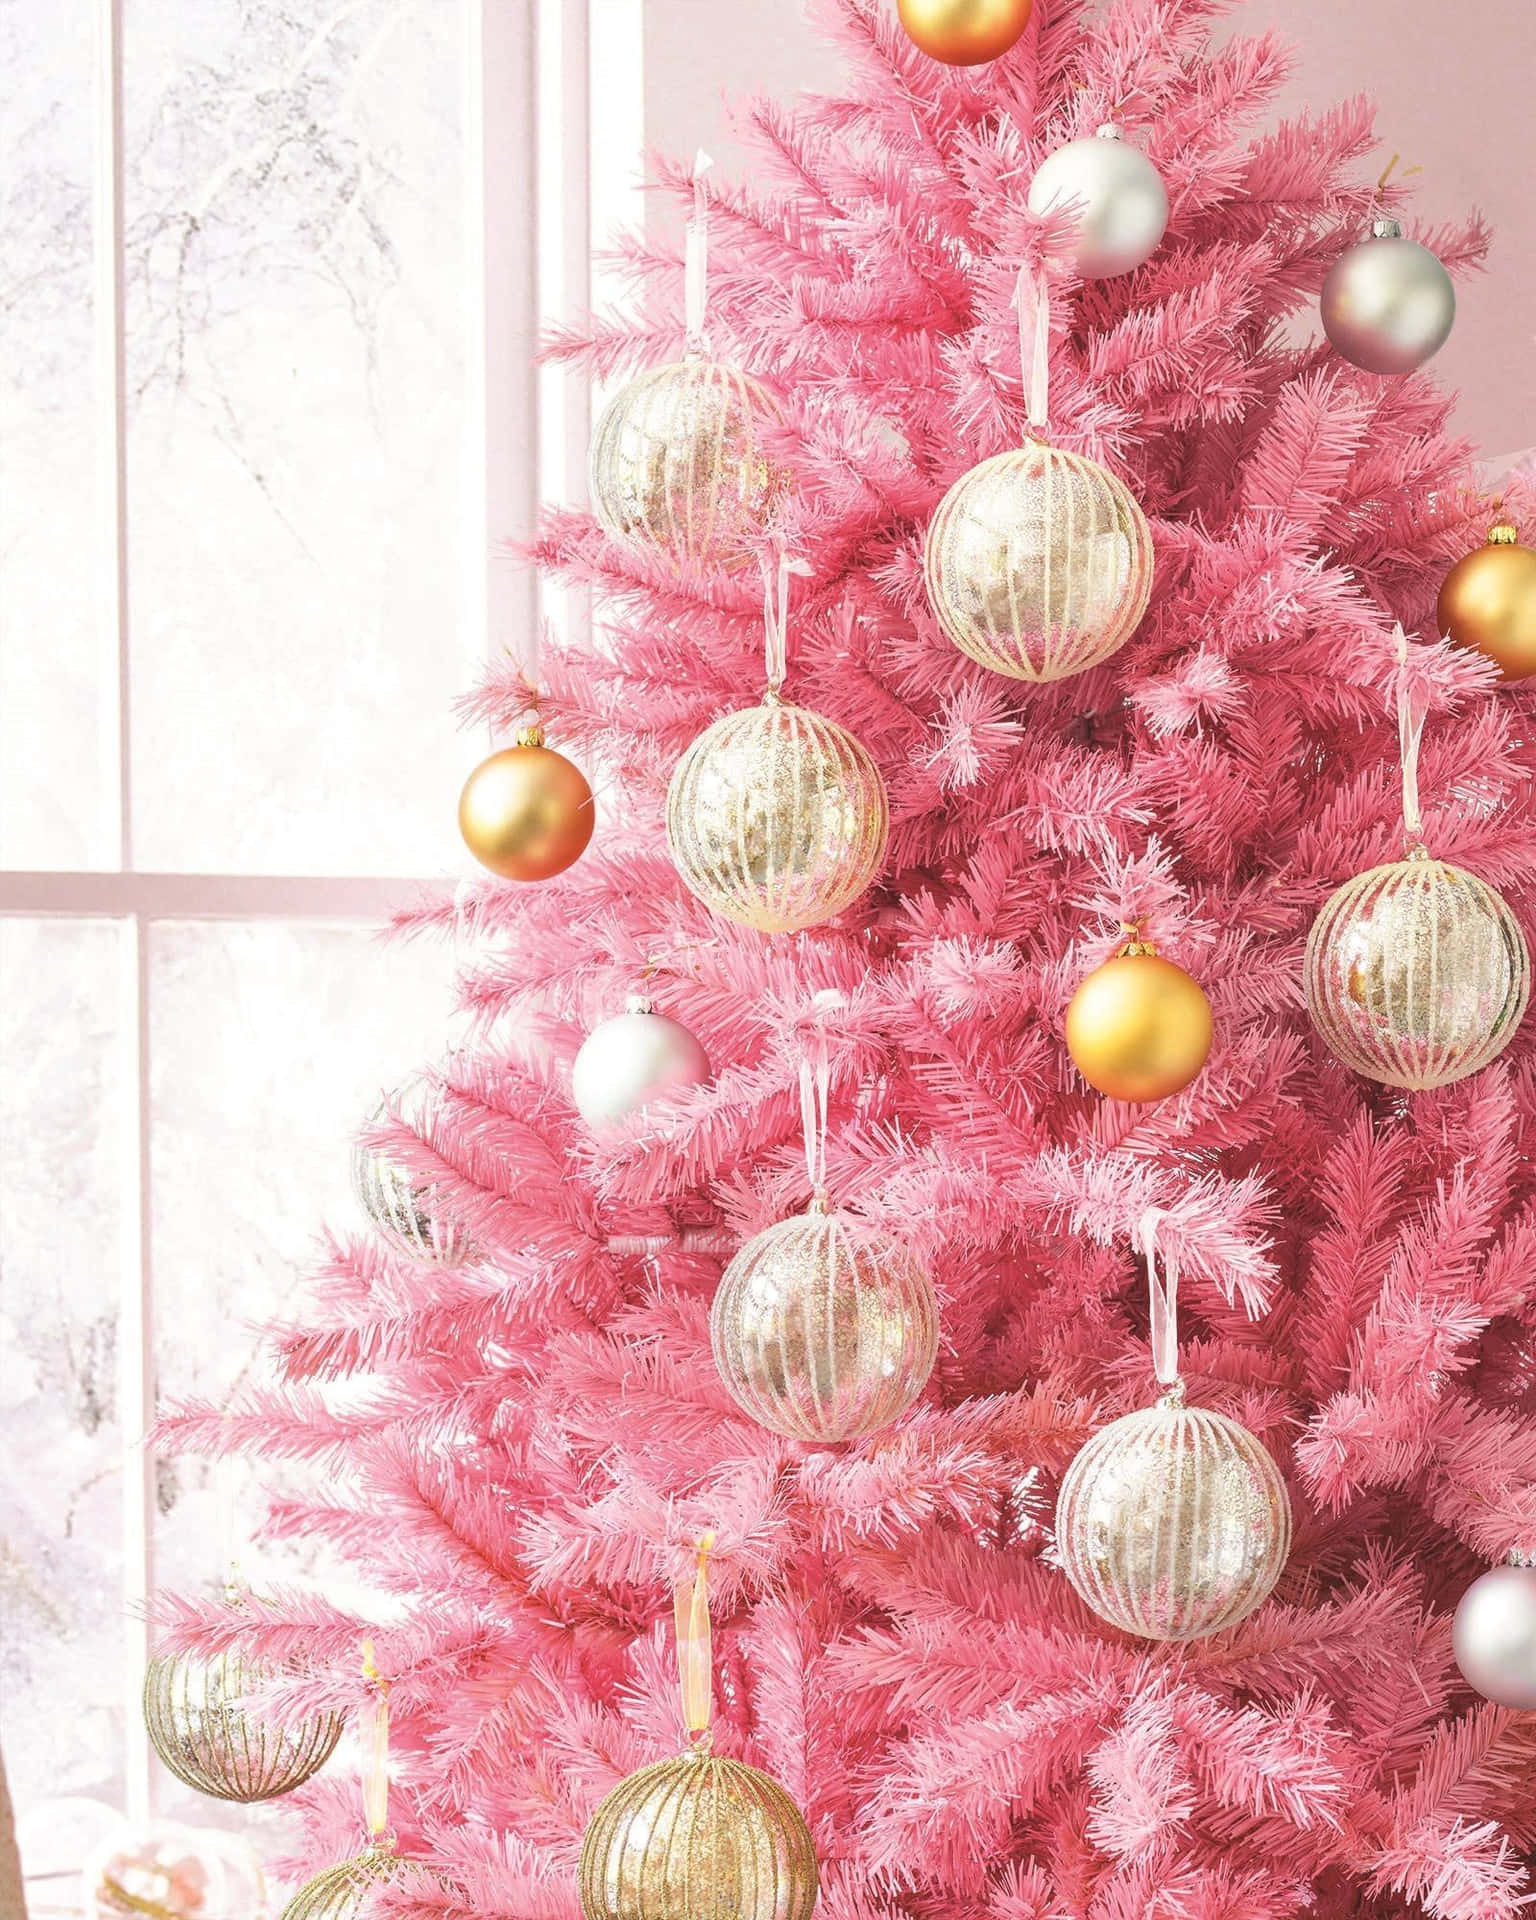 Pink Christmas Tree With Decorations Wallpaper